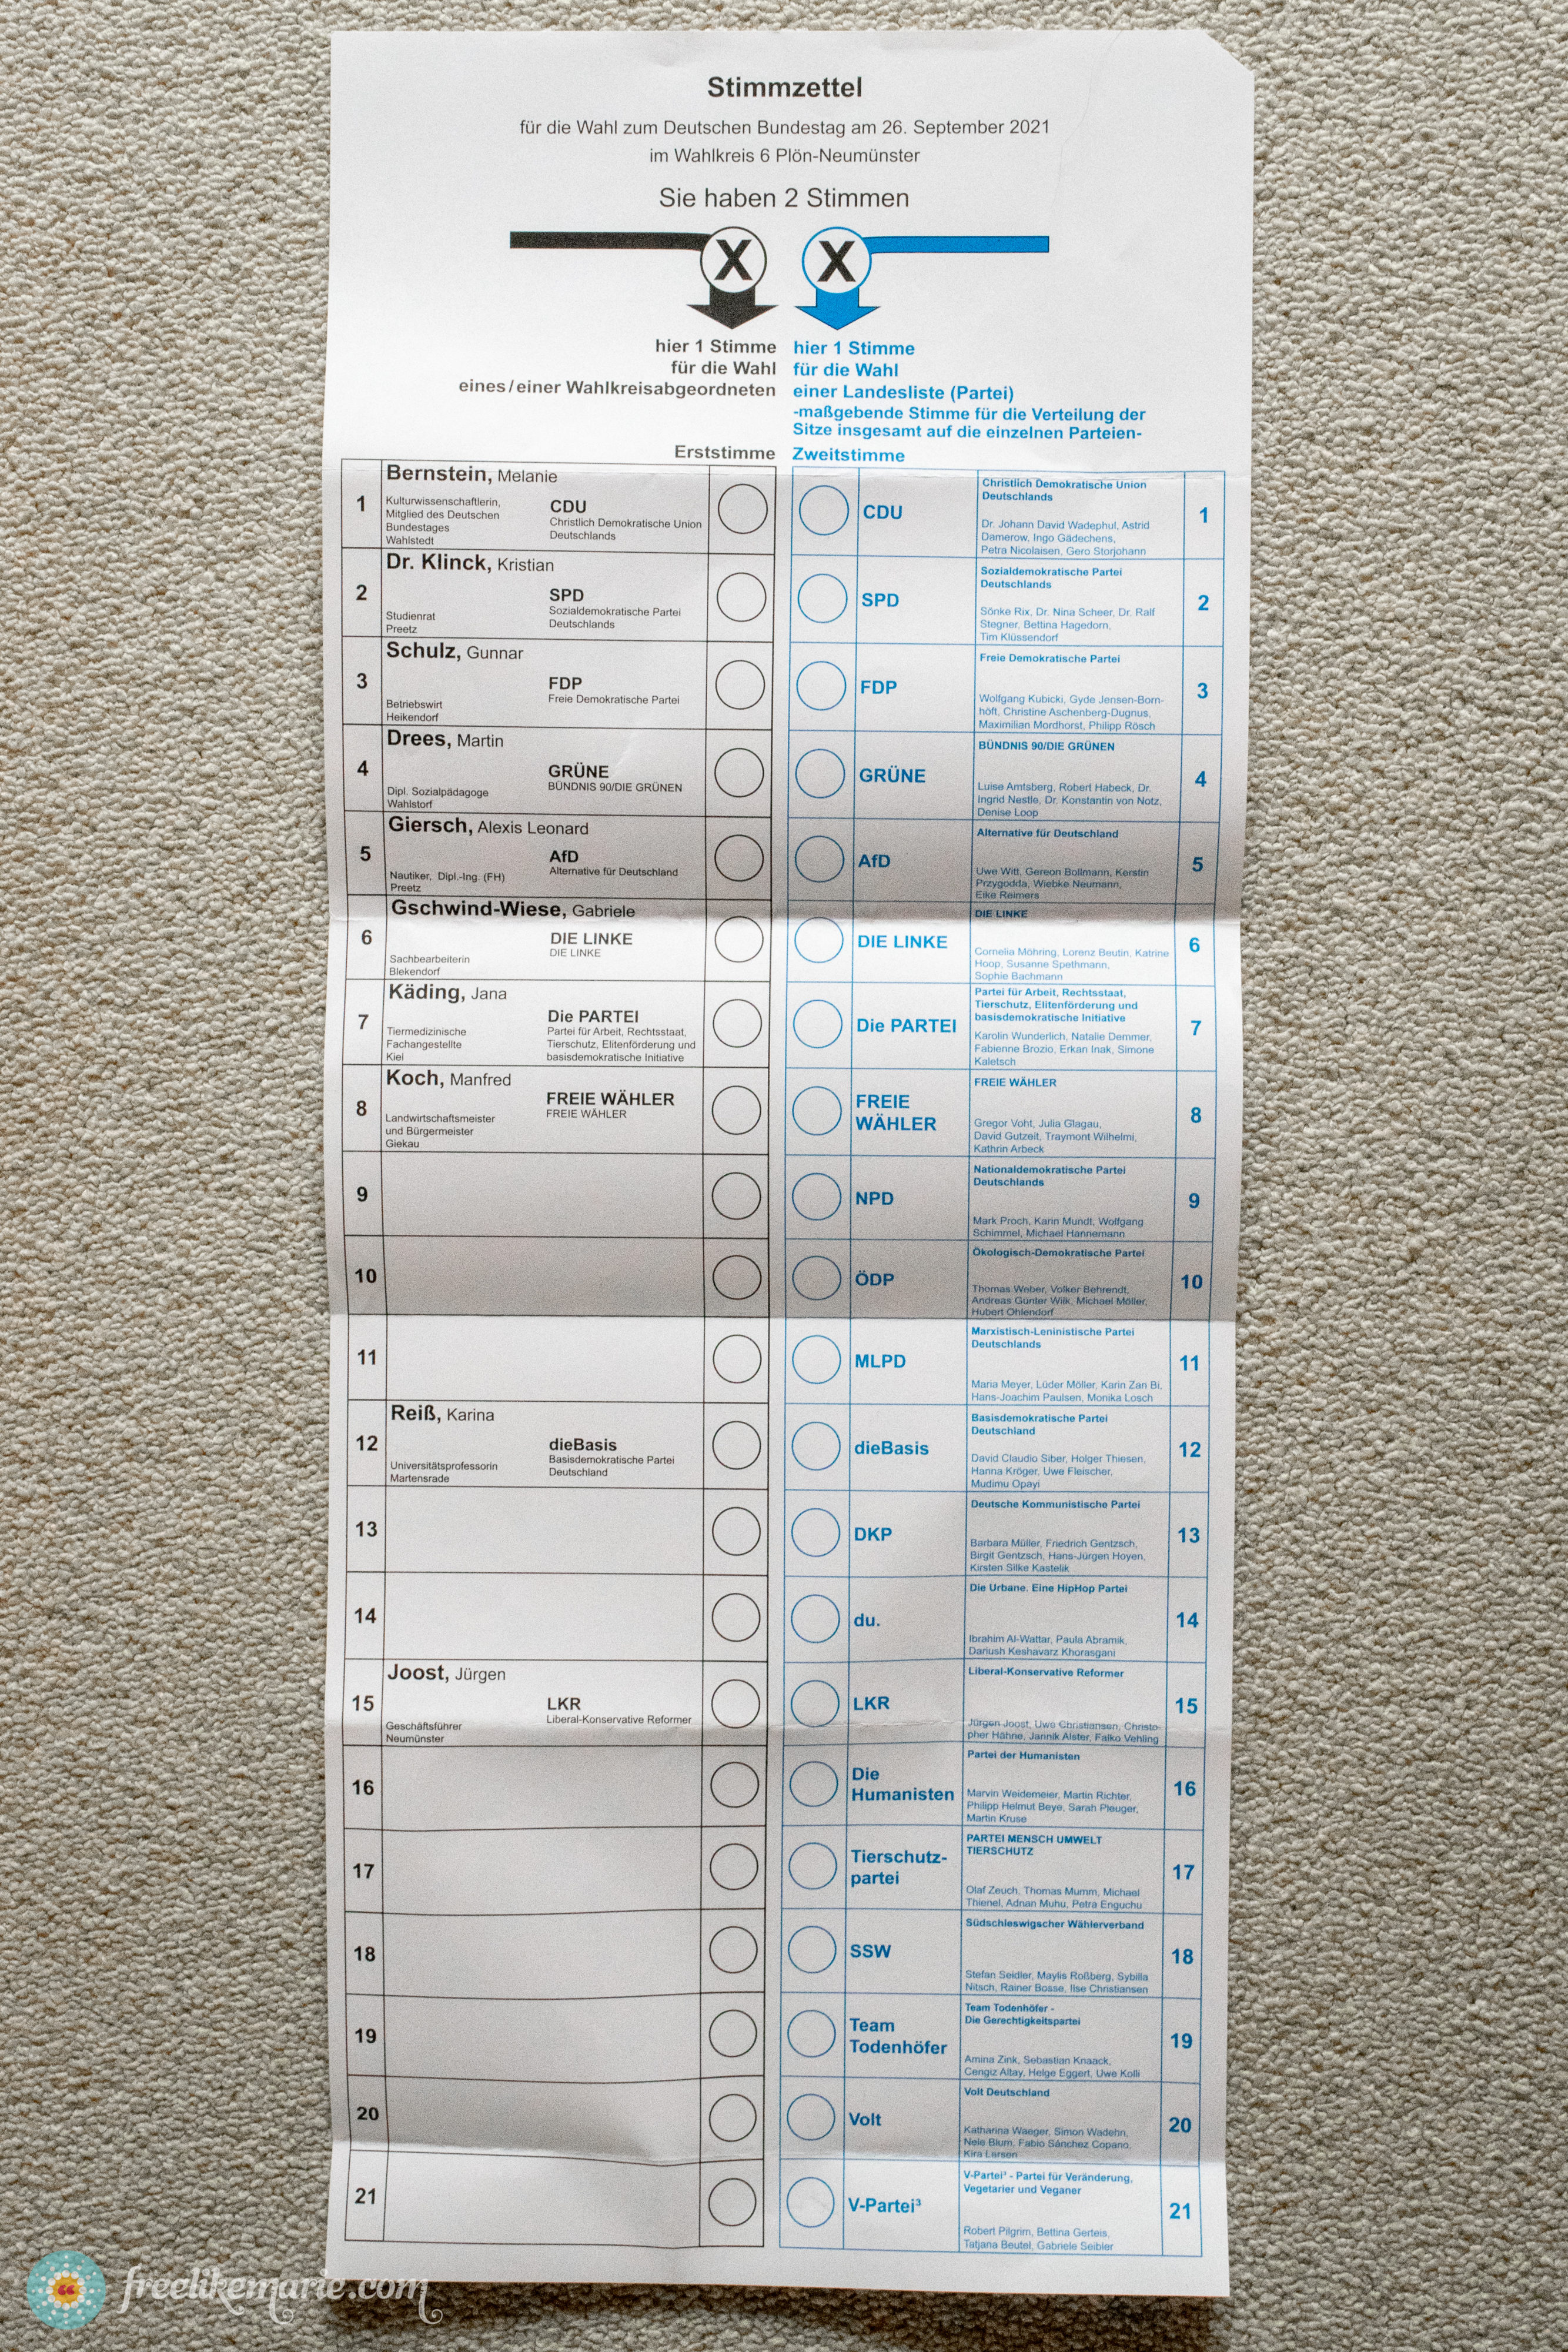 Full ballot paper for one federal state